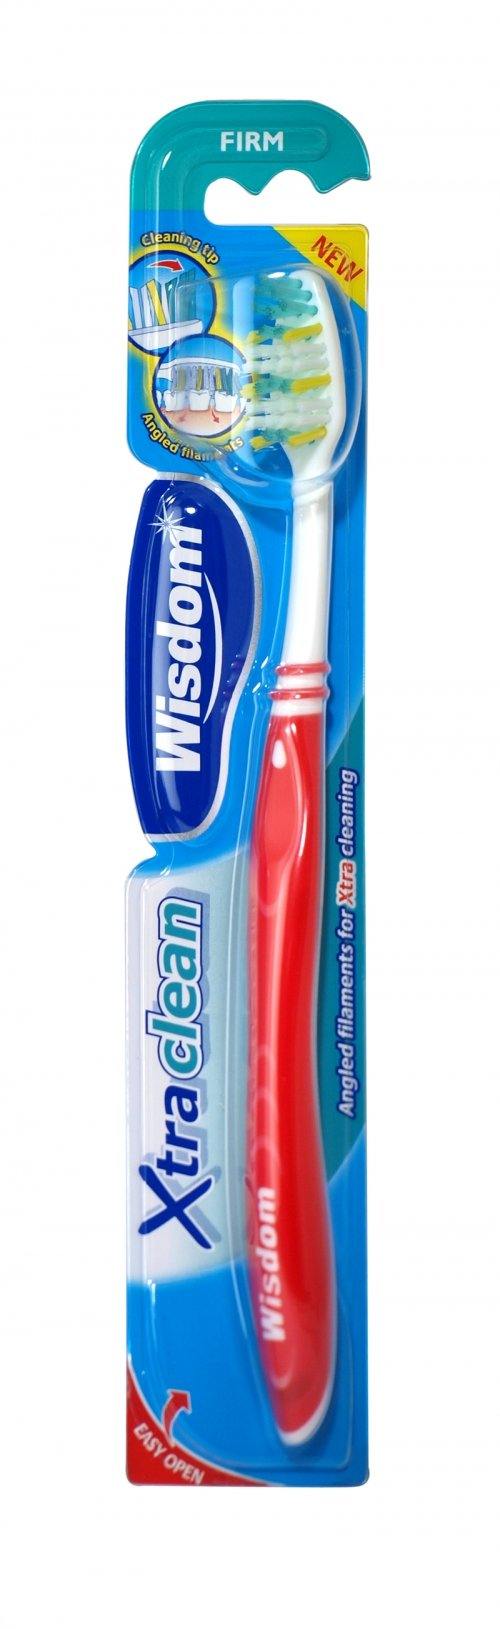 Wisdom Xtra-Clean Toothbrush (Firm) - Single Pack - sassydeals.co.uk